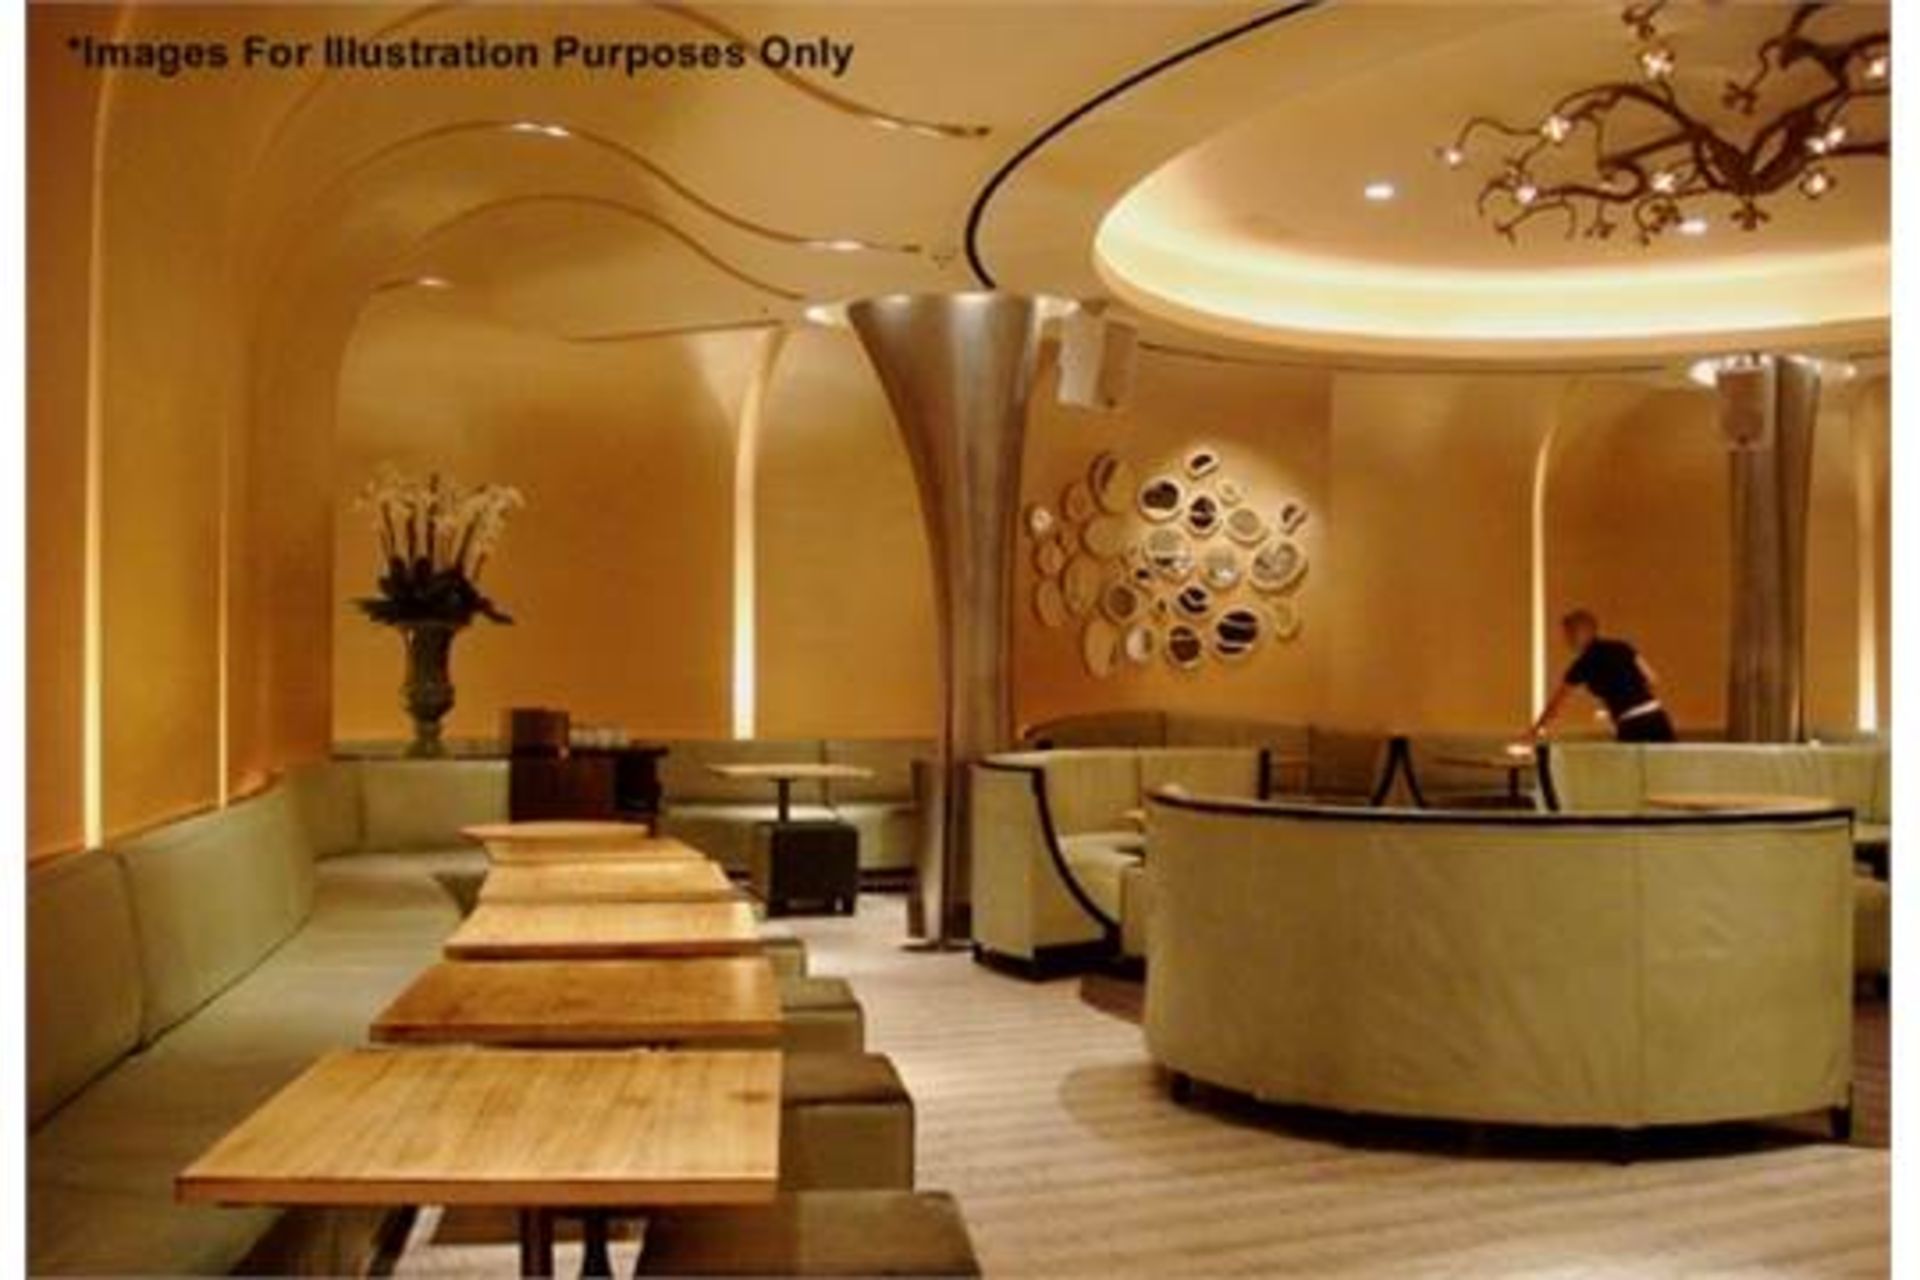 1 x Luxury Upholstered Curved Seating Area - Recently Removed From Nobu - Dimensions: W285 x D62cm x - Image 5 of 6